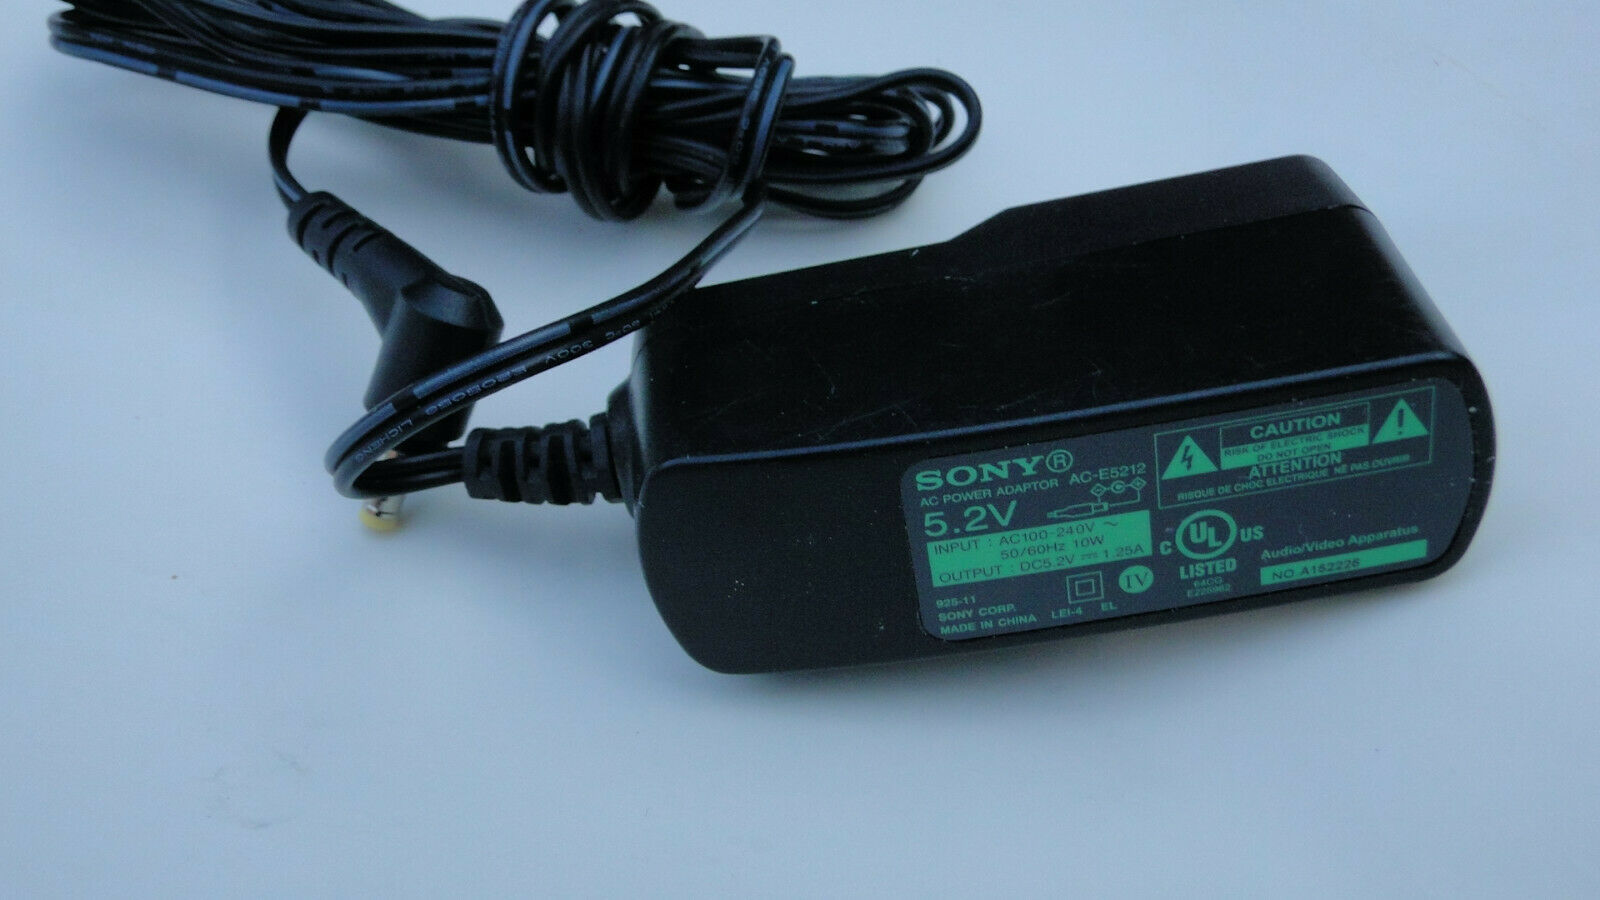 Sony AC-E5212 Adapter charger For SRS-A3 SRS-M50 Bluetooth Speaker 5.2V 1.25A  - £12.22 GBP